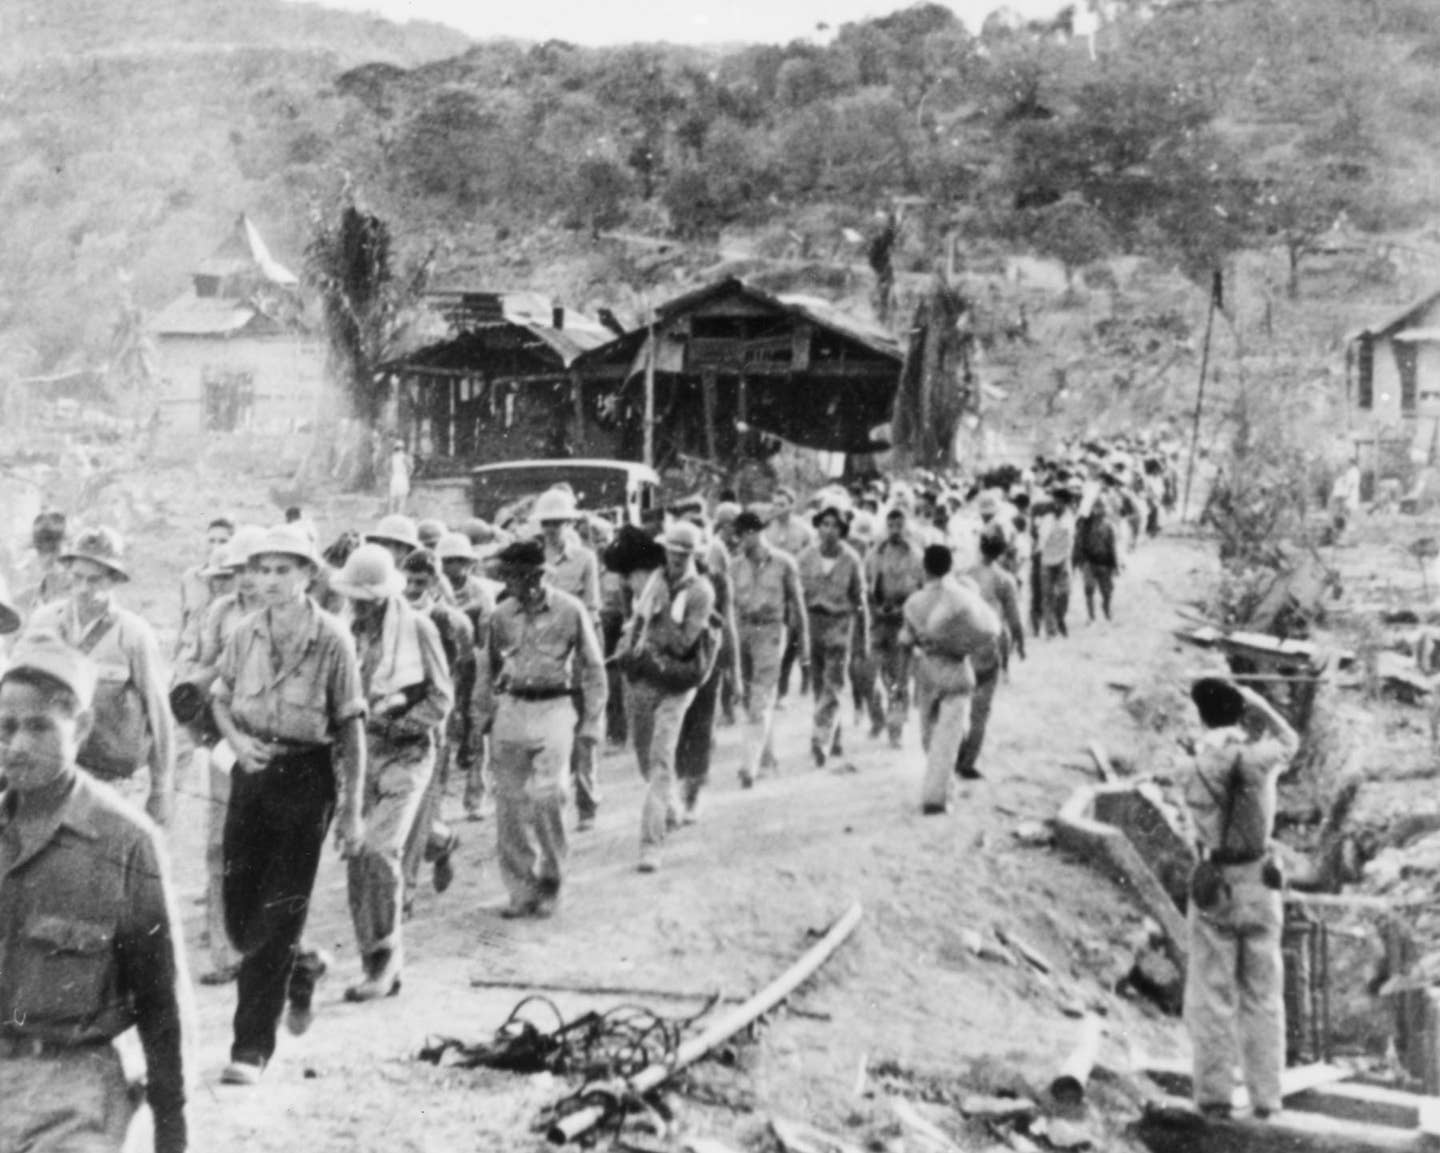 Thousands of men died in the Bataan Death March. (U.S. Army)